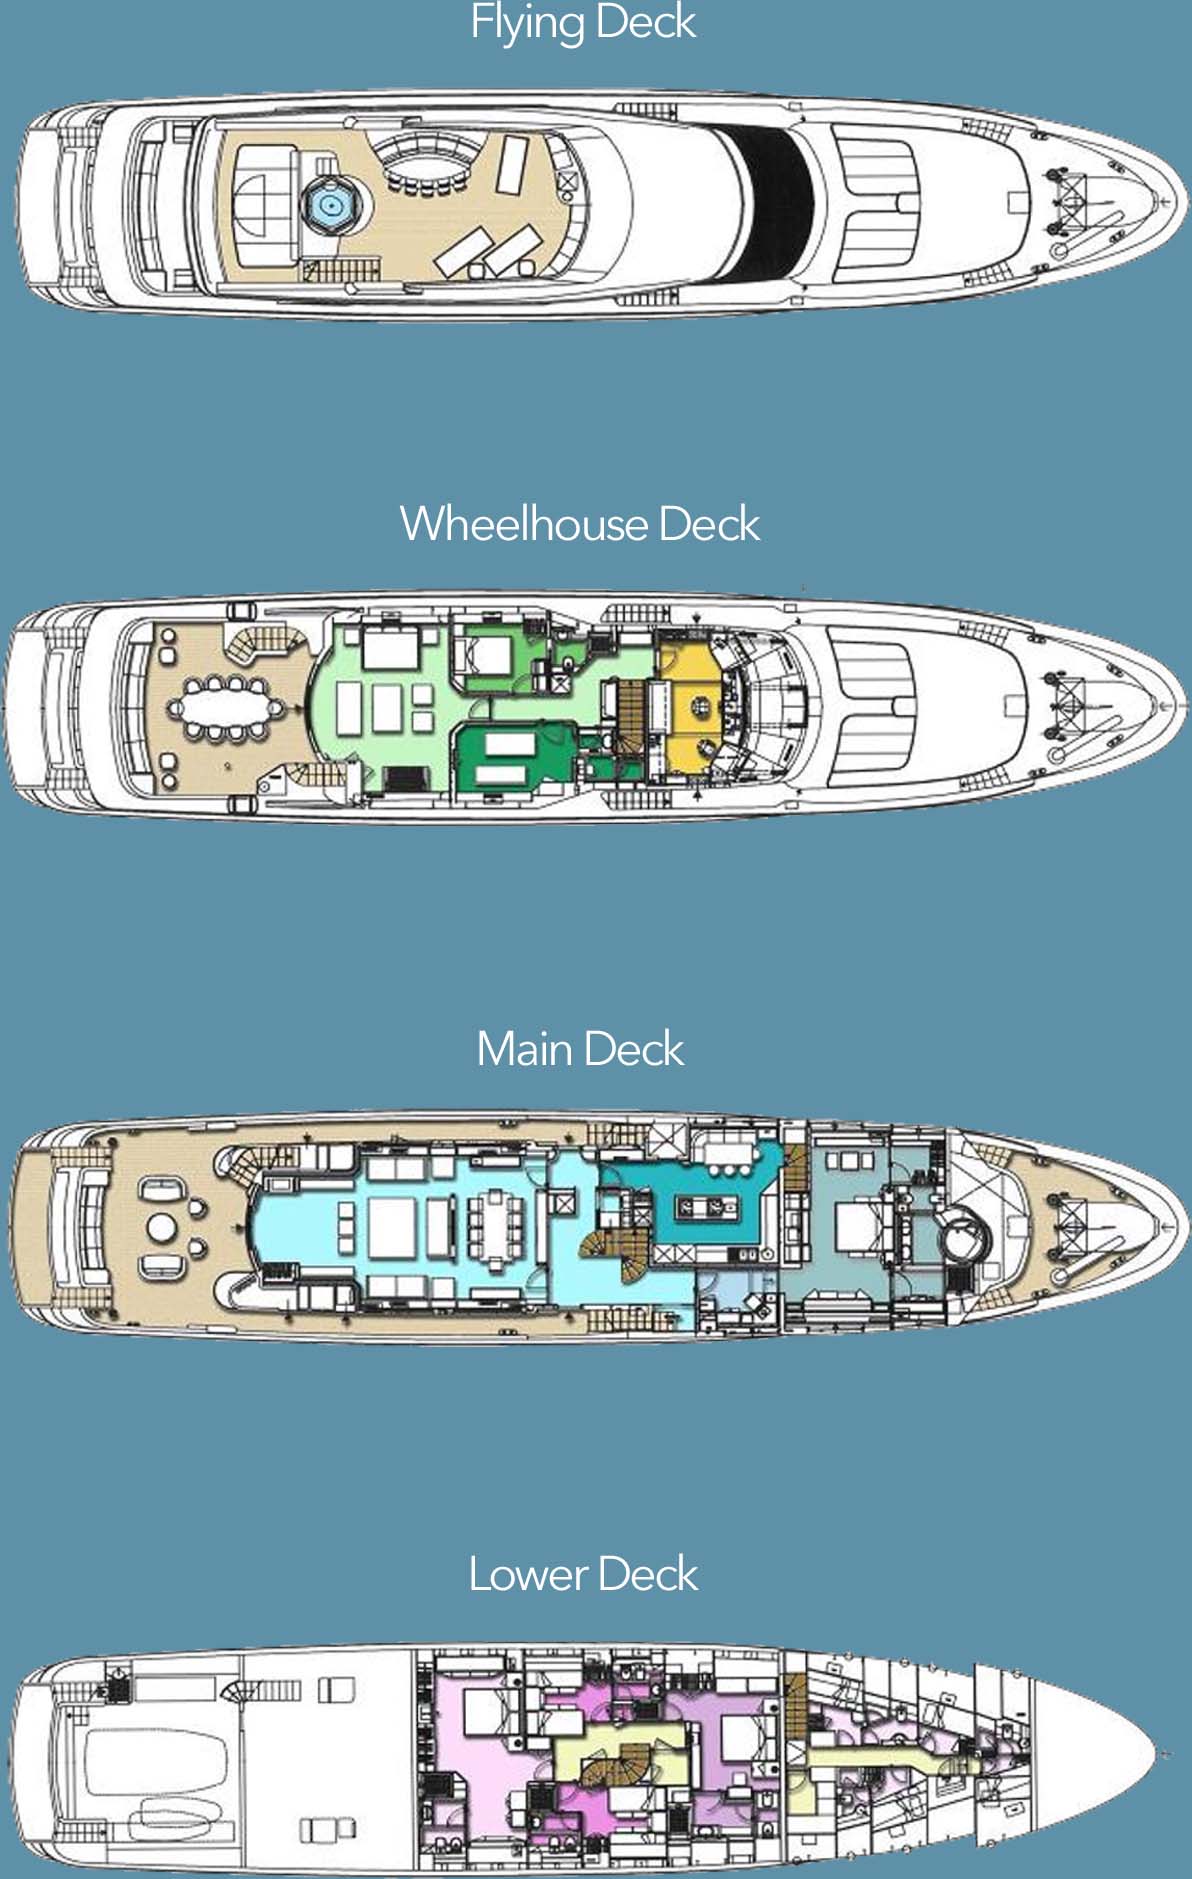 Mischief Super Yacht - Specification and Deck Layout